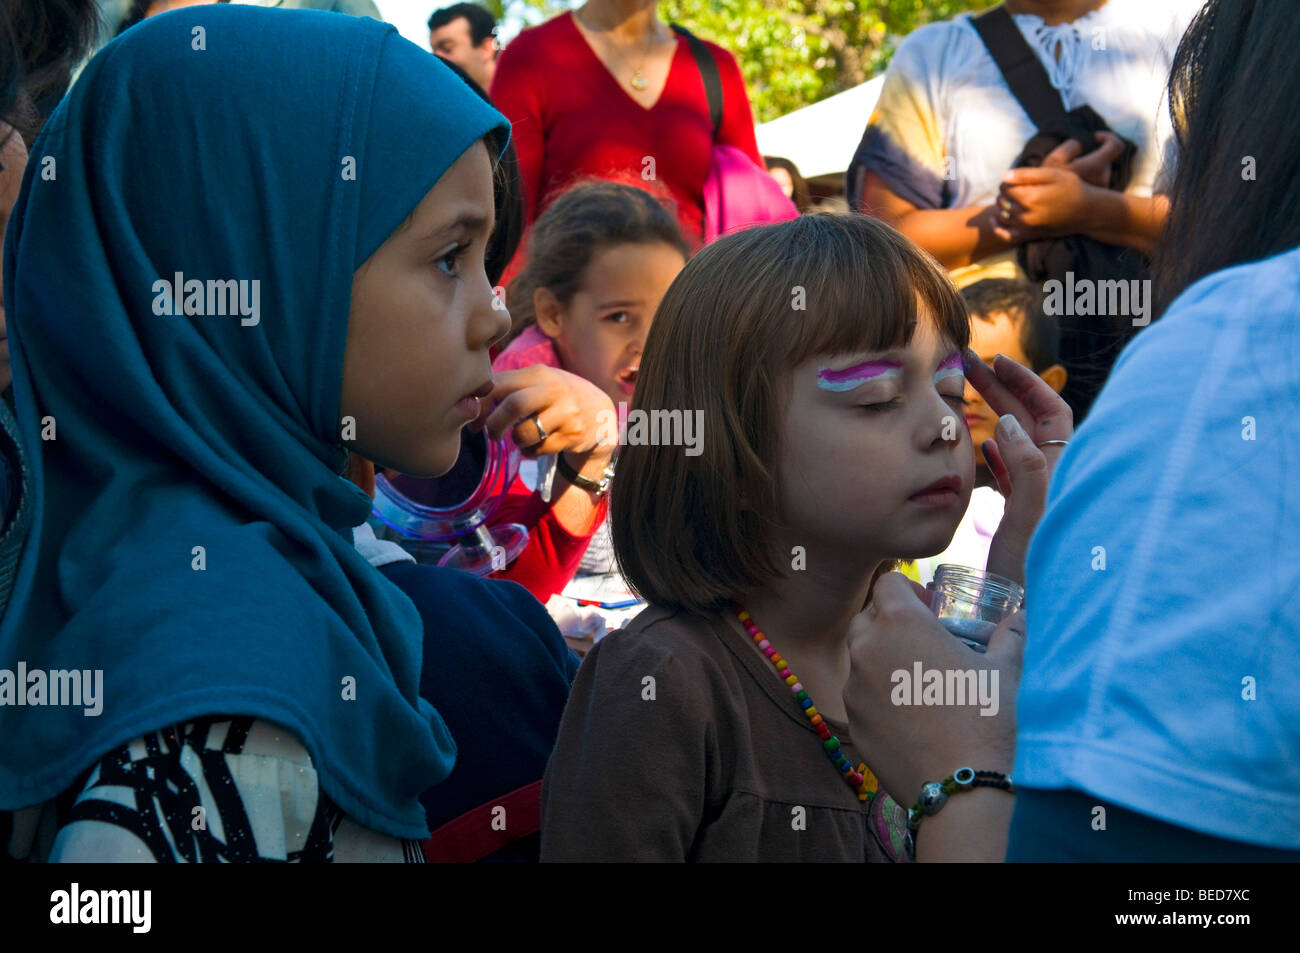 Street Fair Children getting make-up on their faces Montreal canada Stock Photo